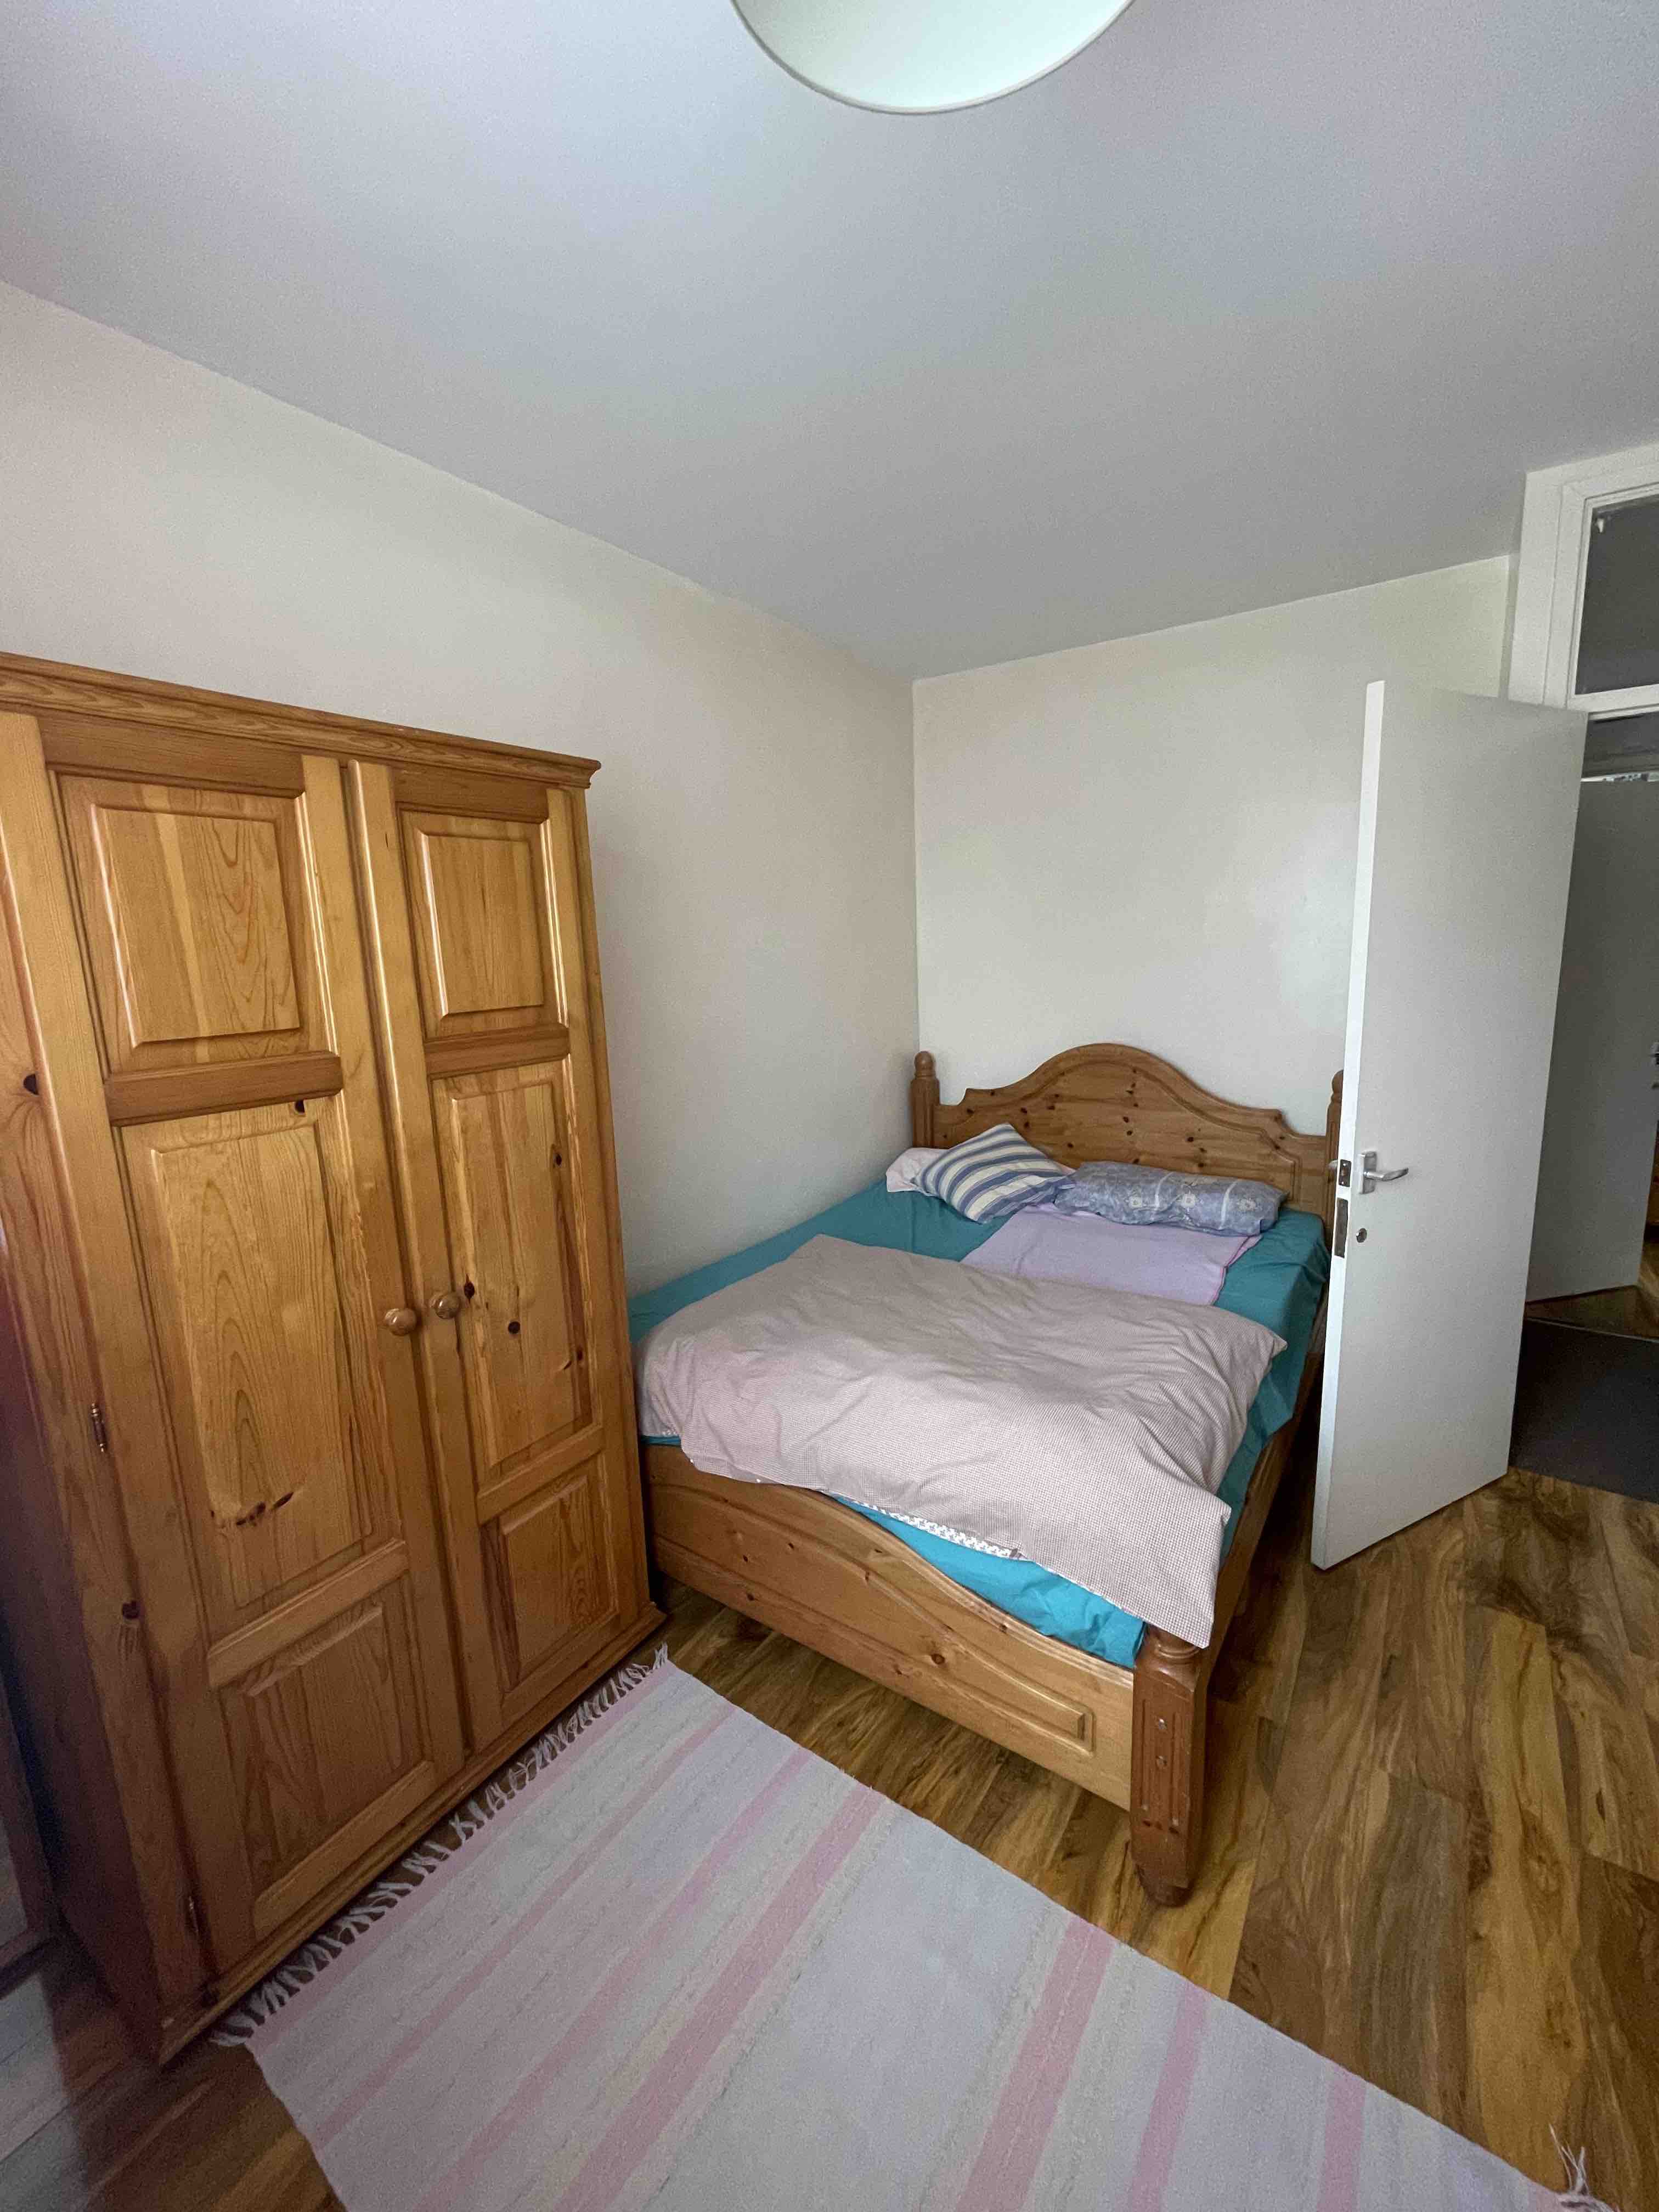 1 bedroom available RoomsLocal image